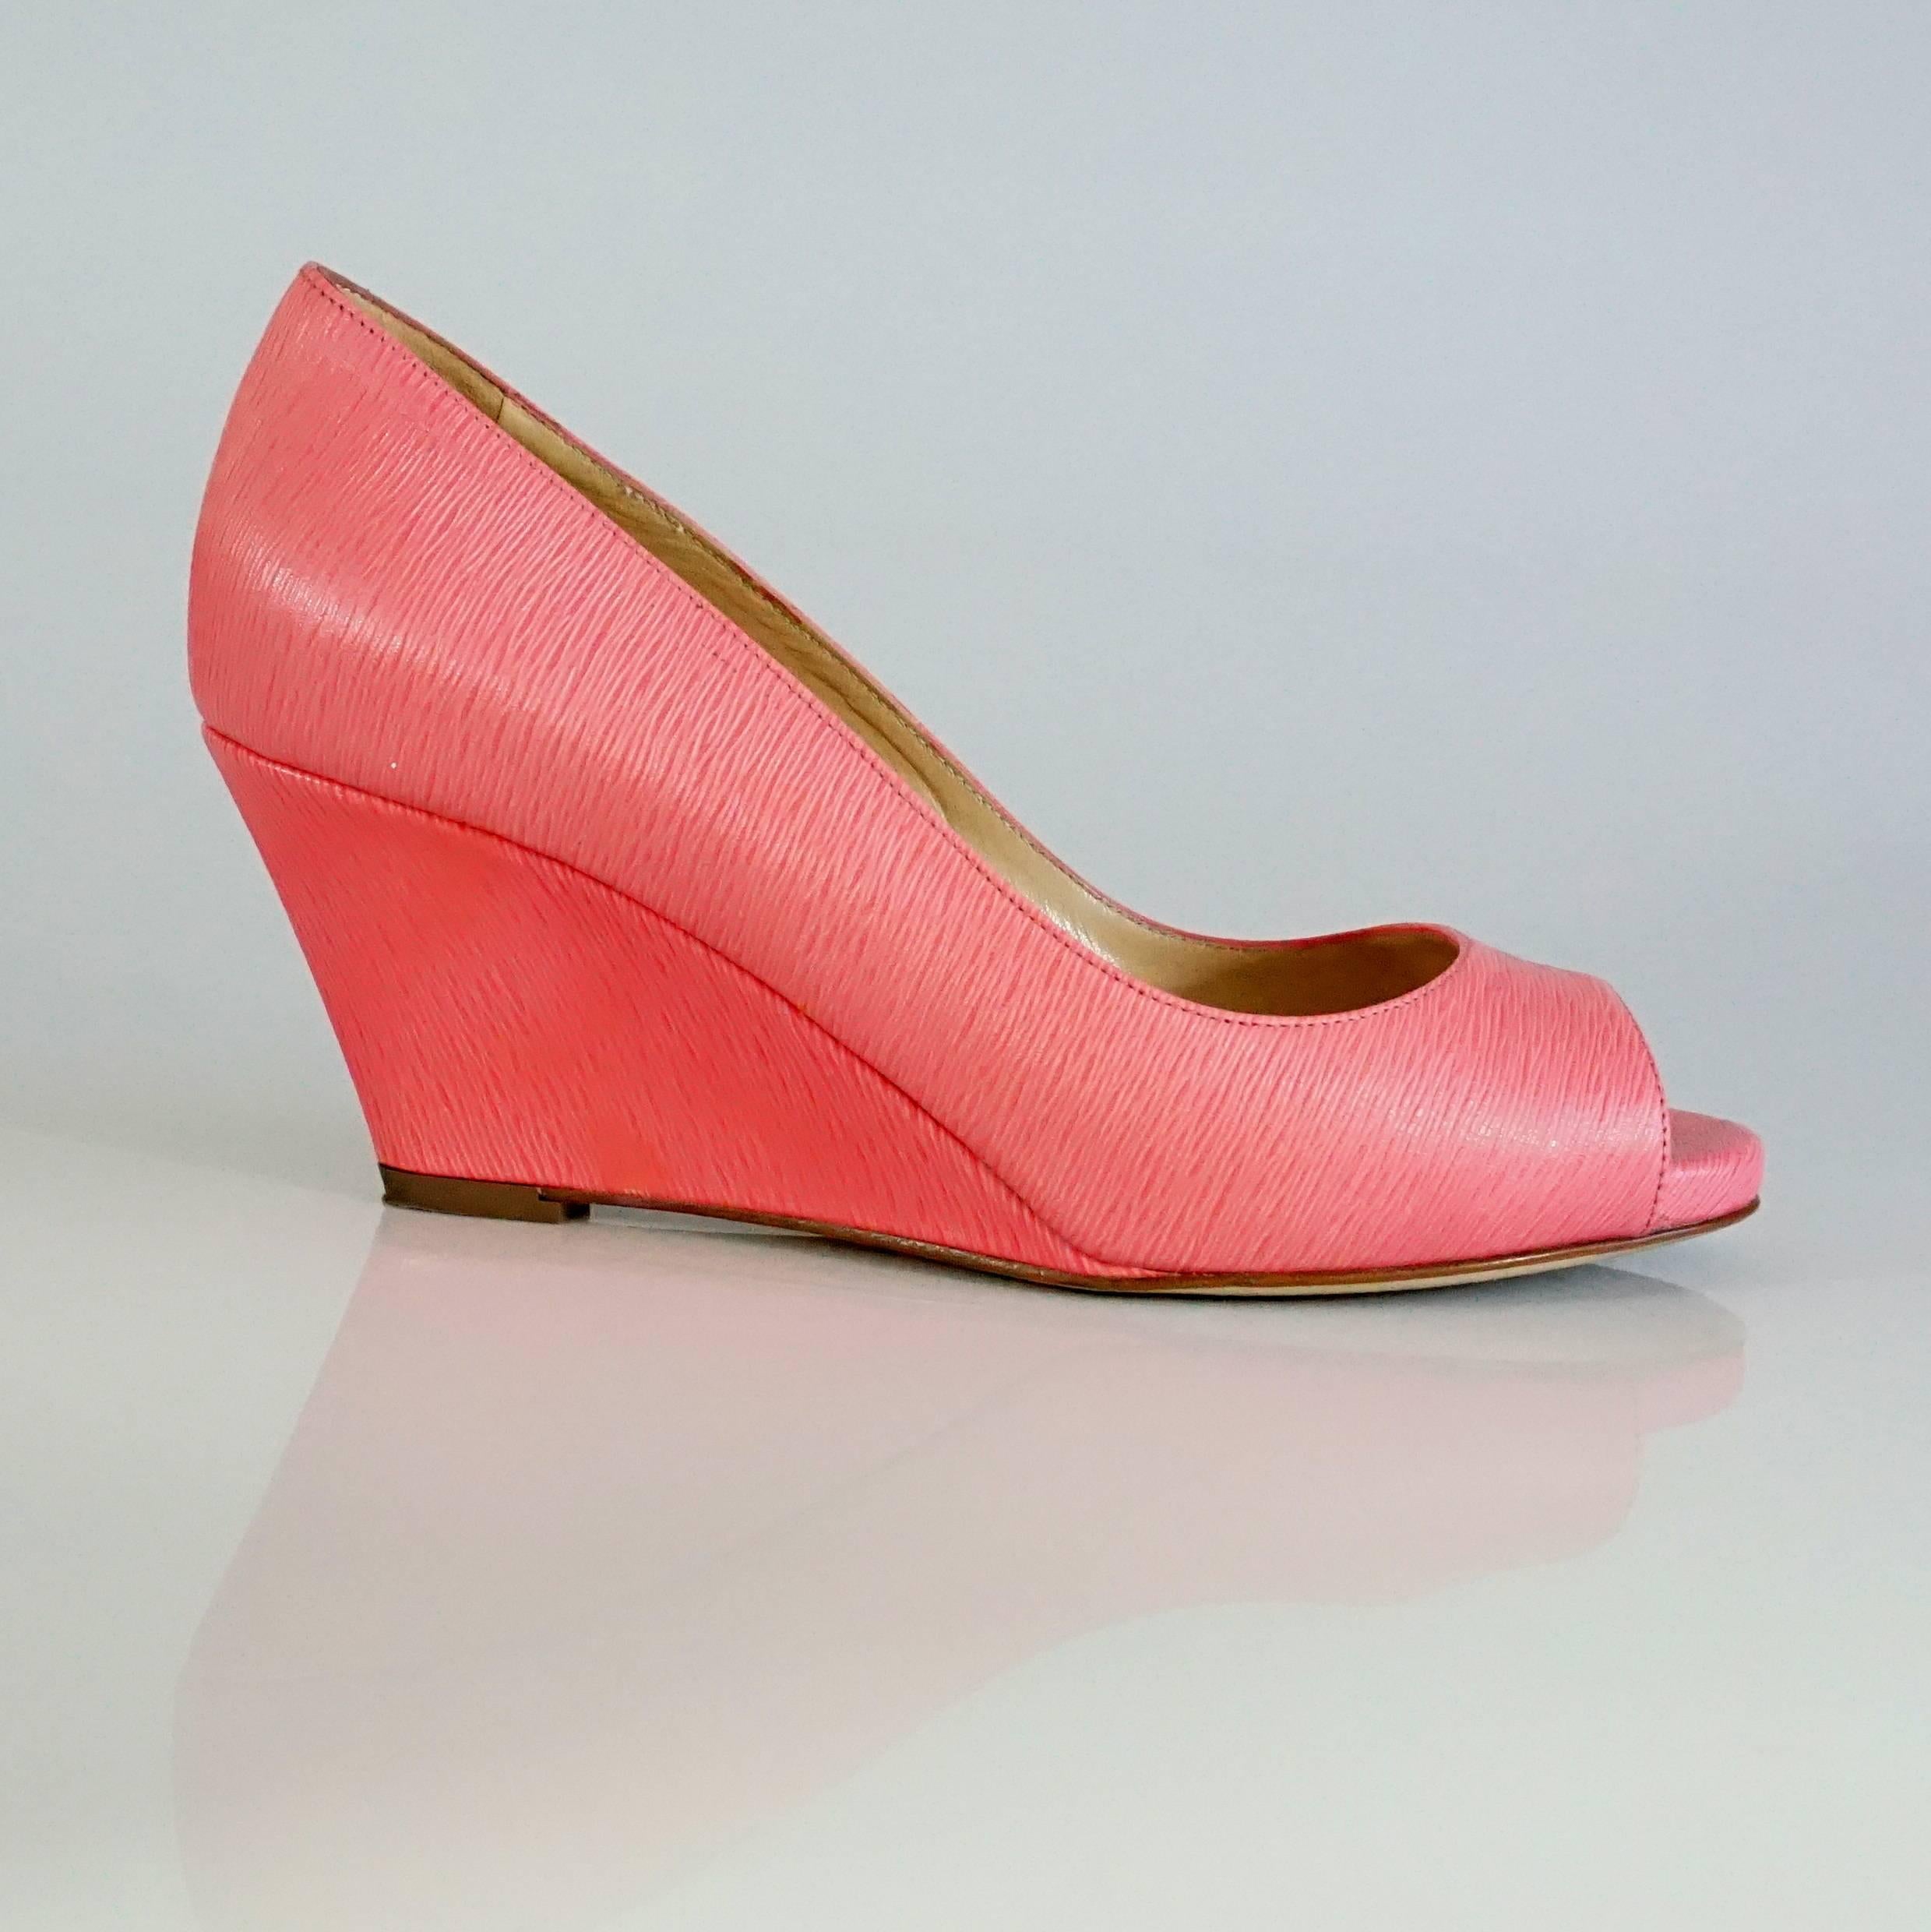 Sergio Rossi Pink Epi Leather Open Toe Wedges - 36.5. These shoes are in excellent condition with light wear and some bottom wear. They are the perfect pop of color for any outfit and features a slender, sleek fit.

Measurements:
Wedge-